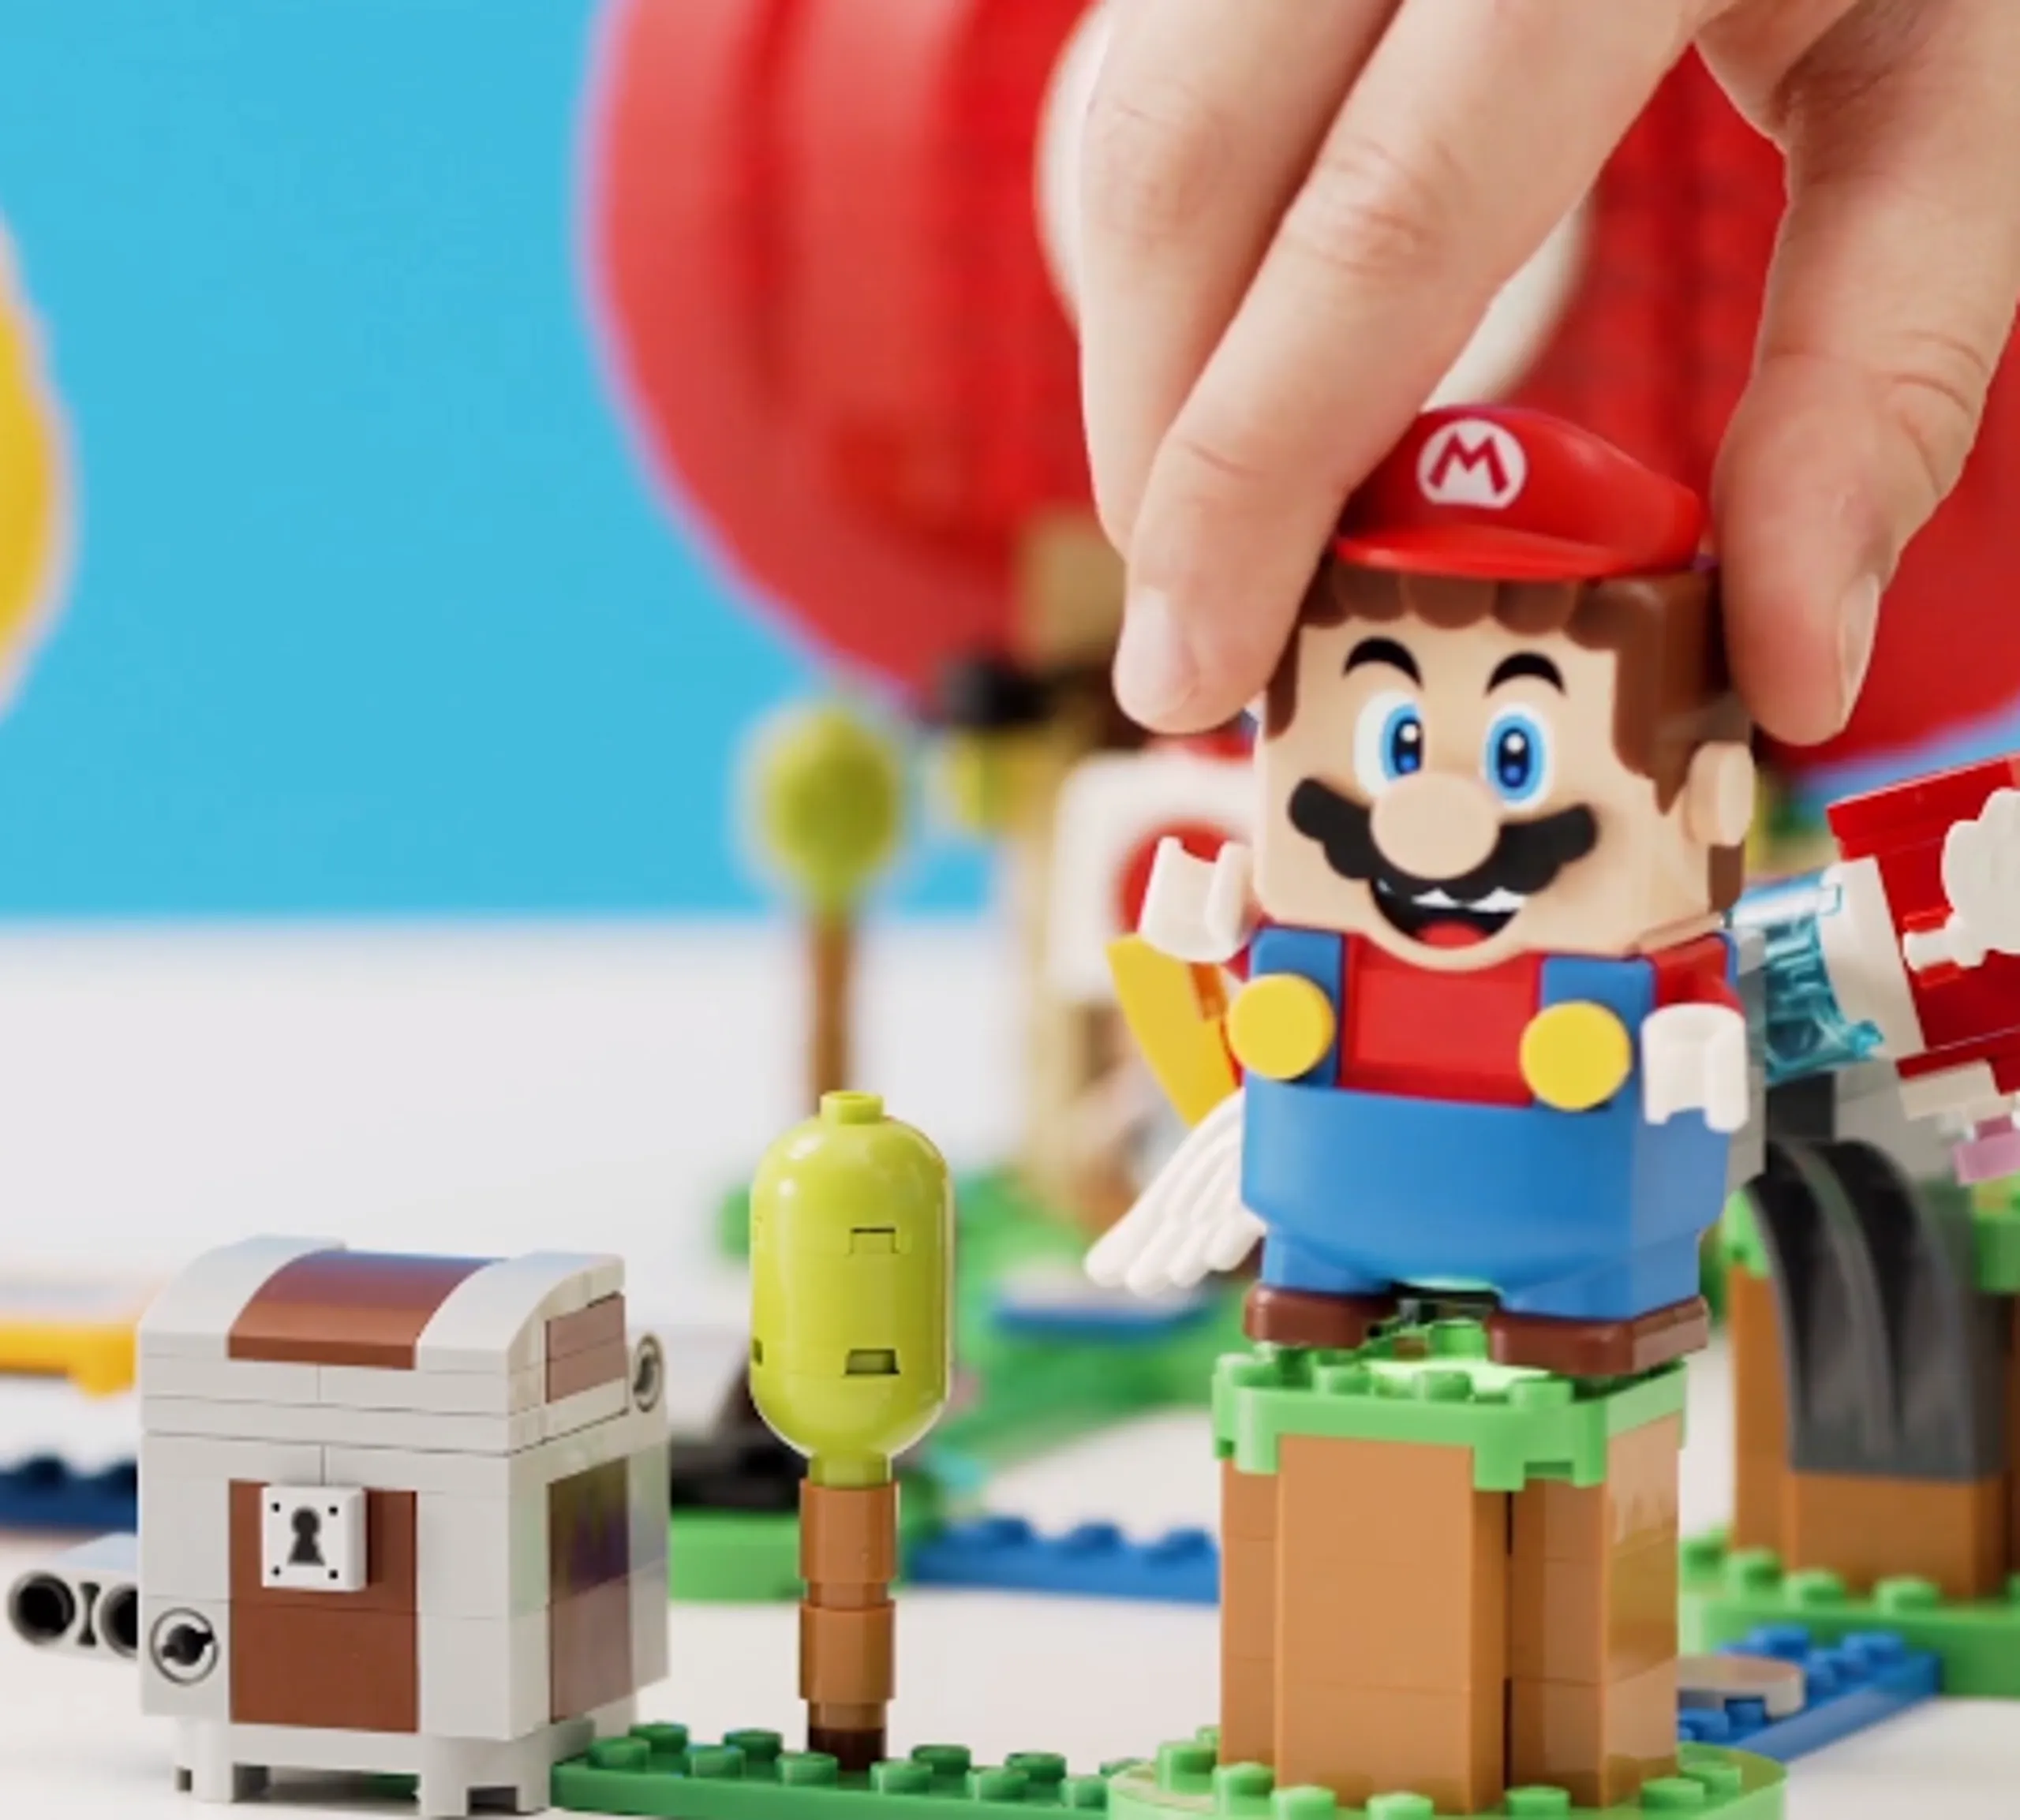 The Lego Super Mario set is way more awesome than it needs to be【Video】